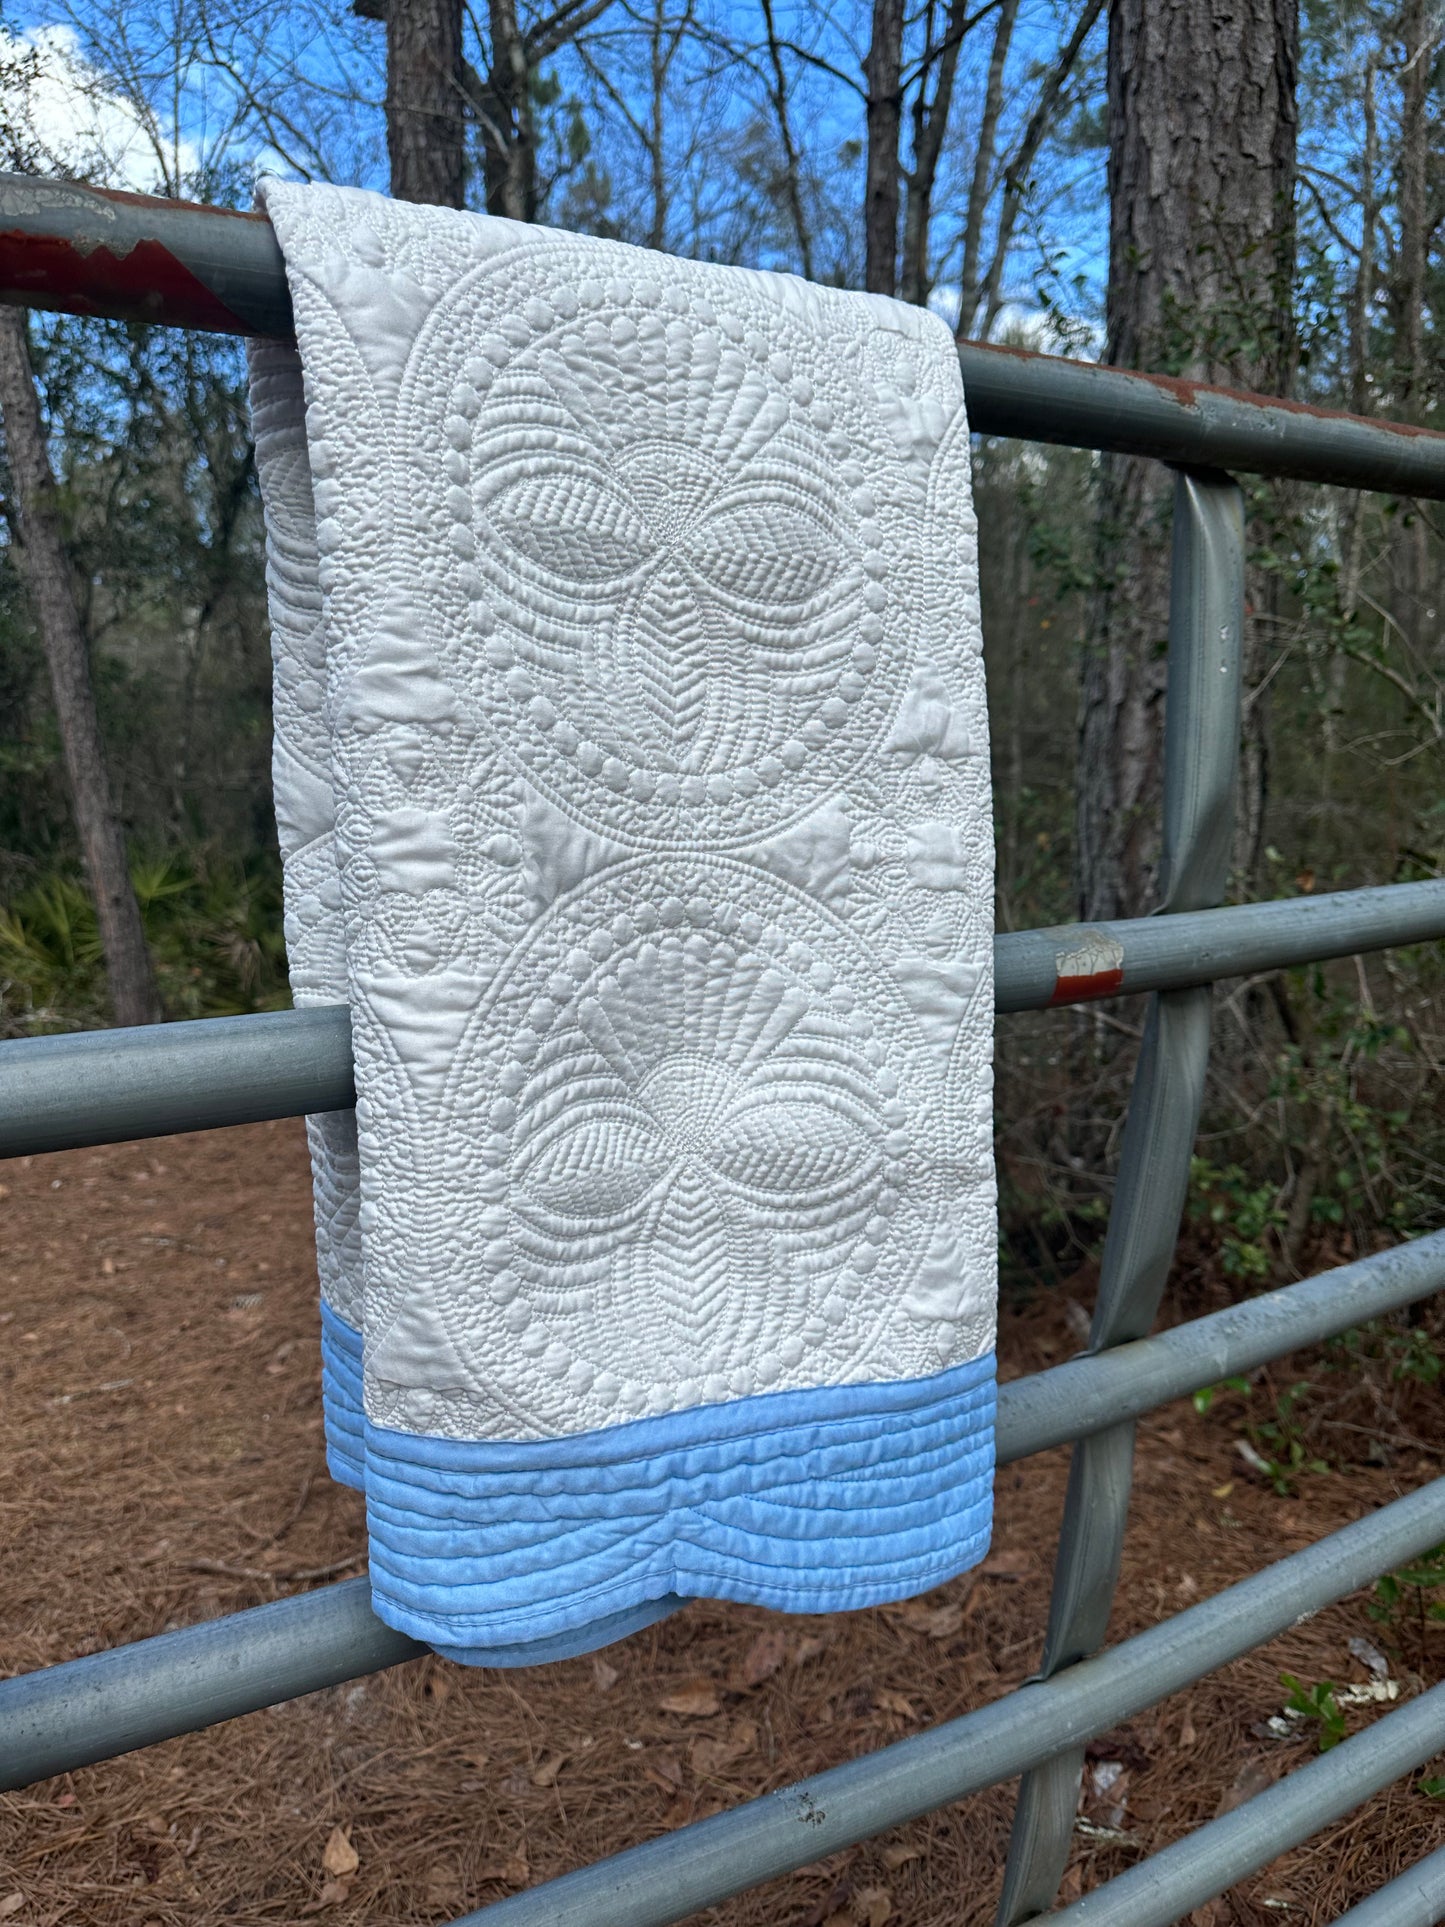 Baby: Quilted Cotton Blankets